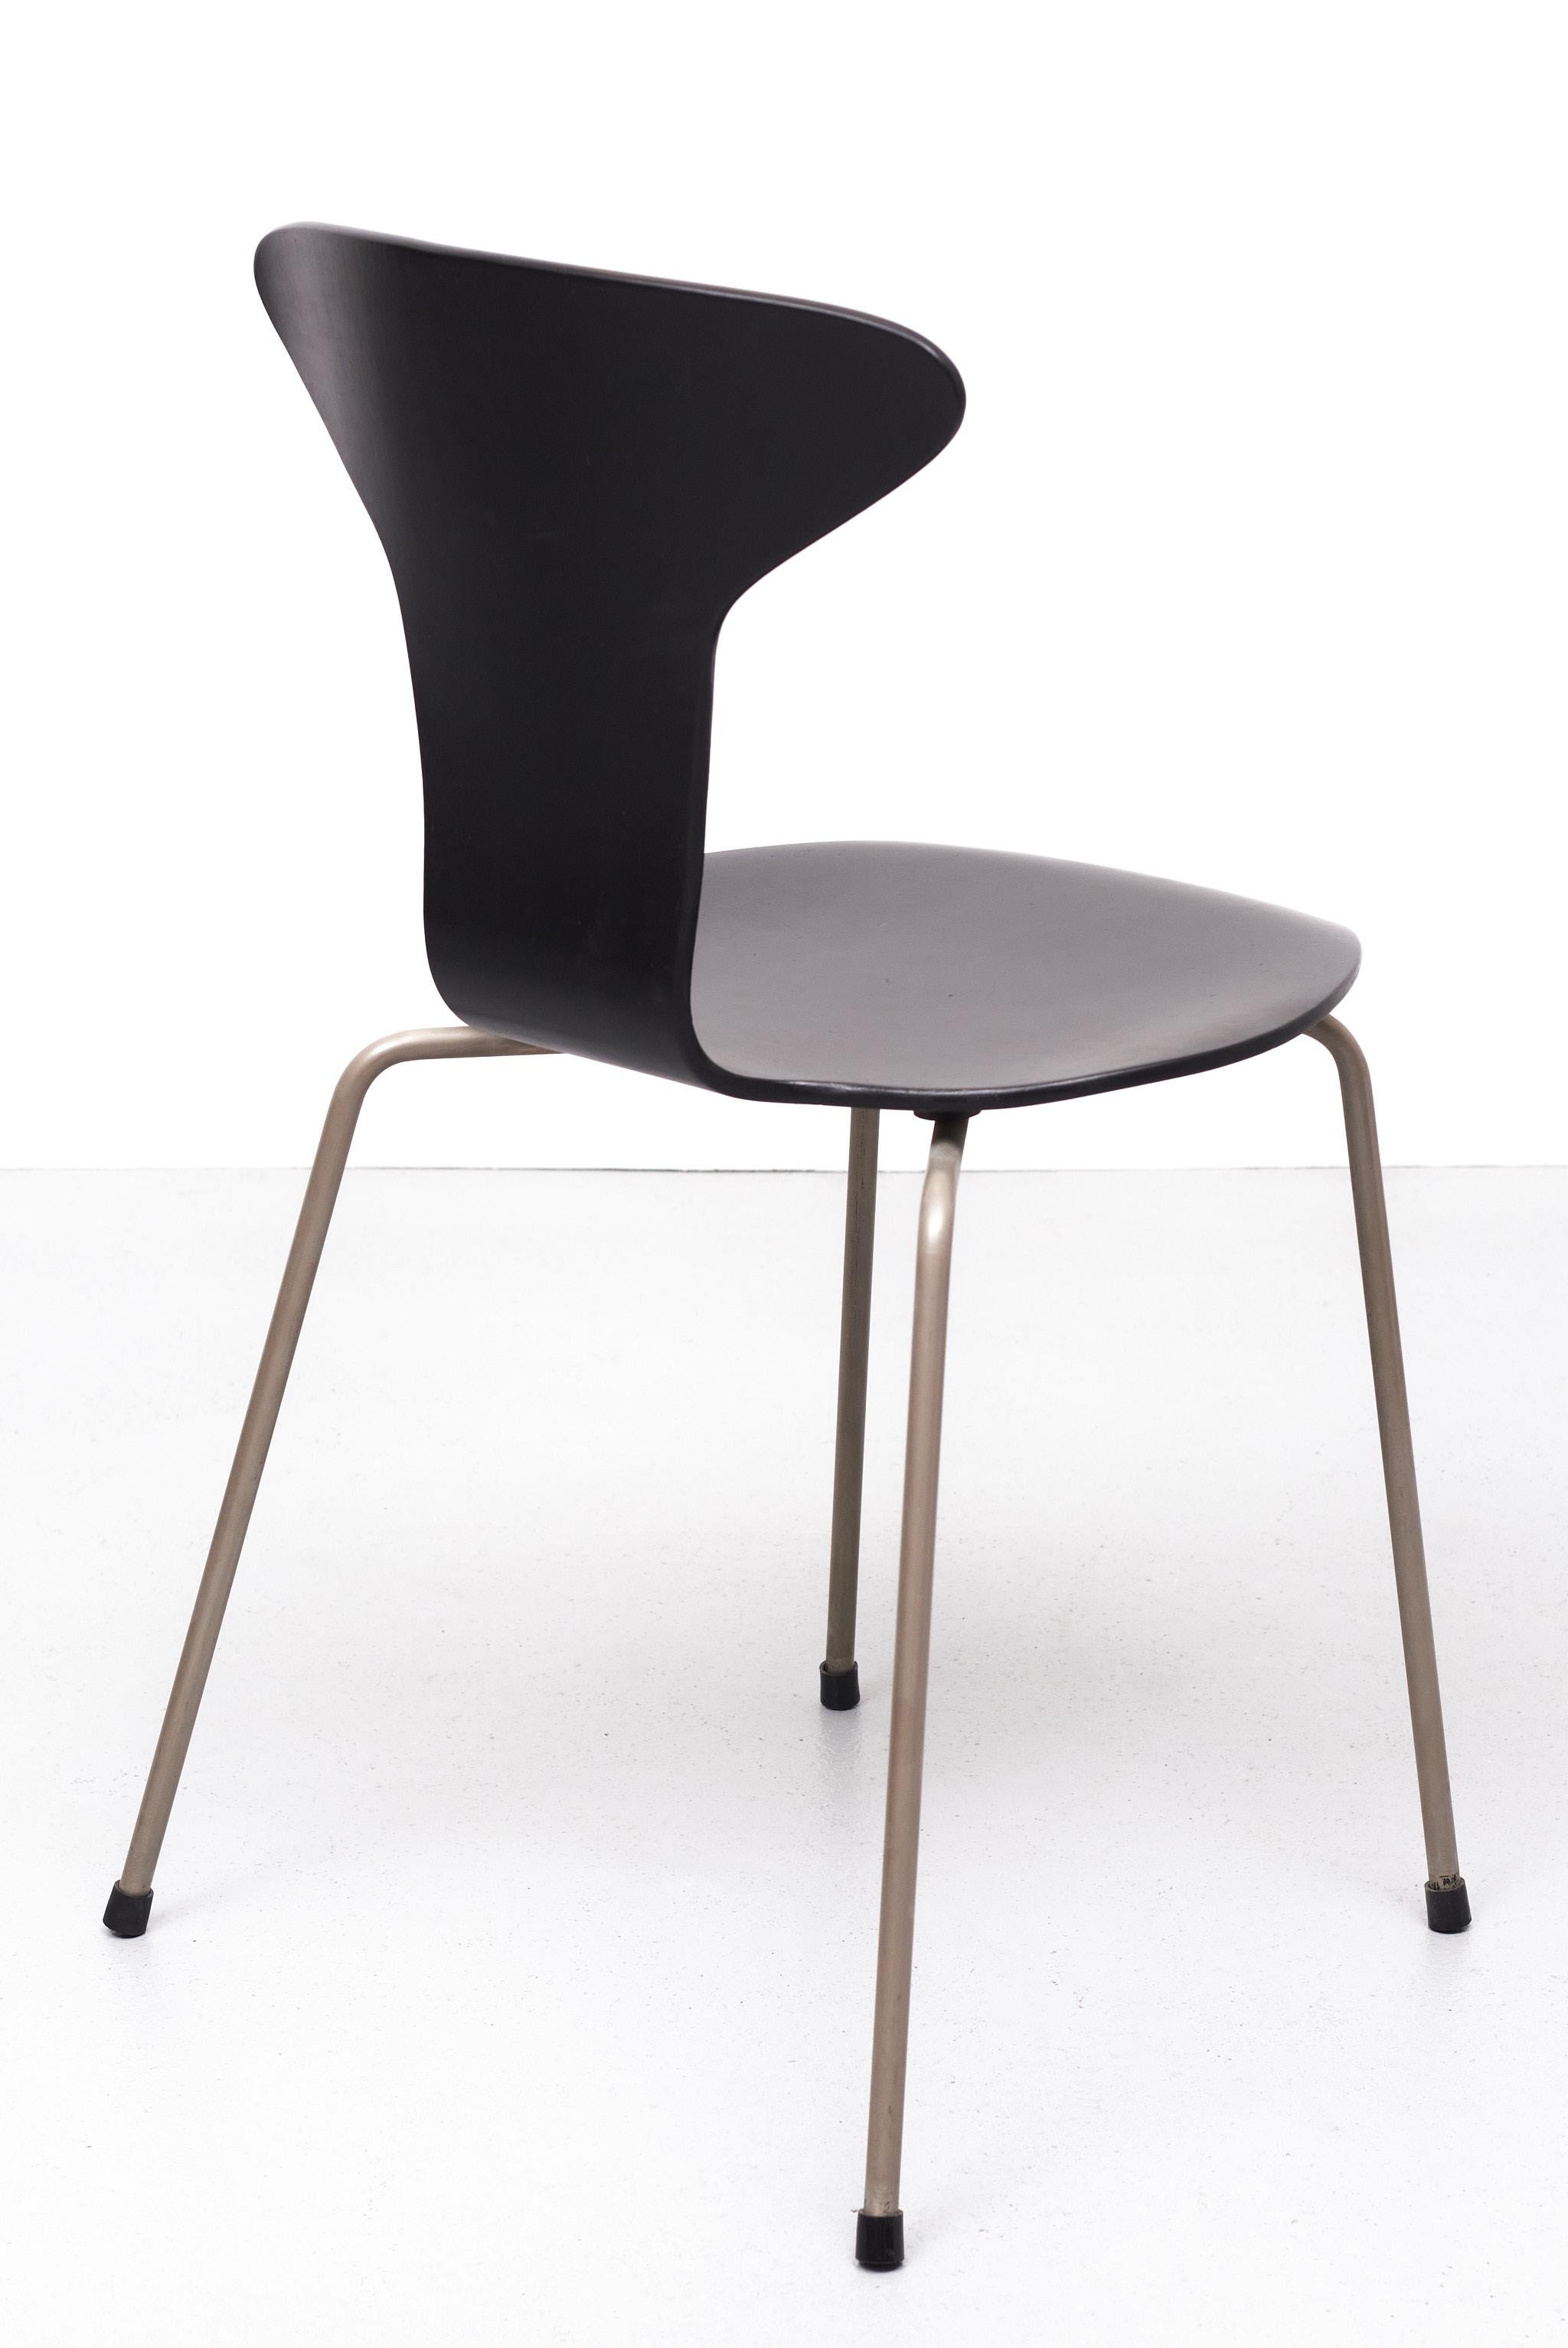 Mid-20th Century Mosquito Chair 3105 by Arne Jacobsen for Fritz Hansen, 1960s For Sale